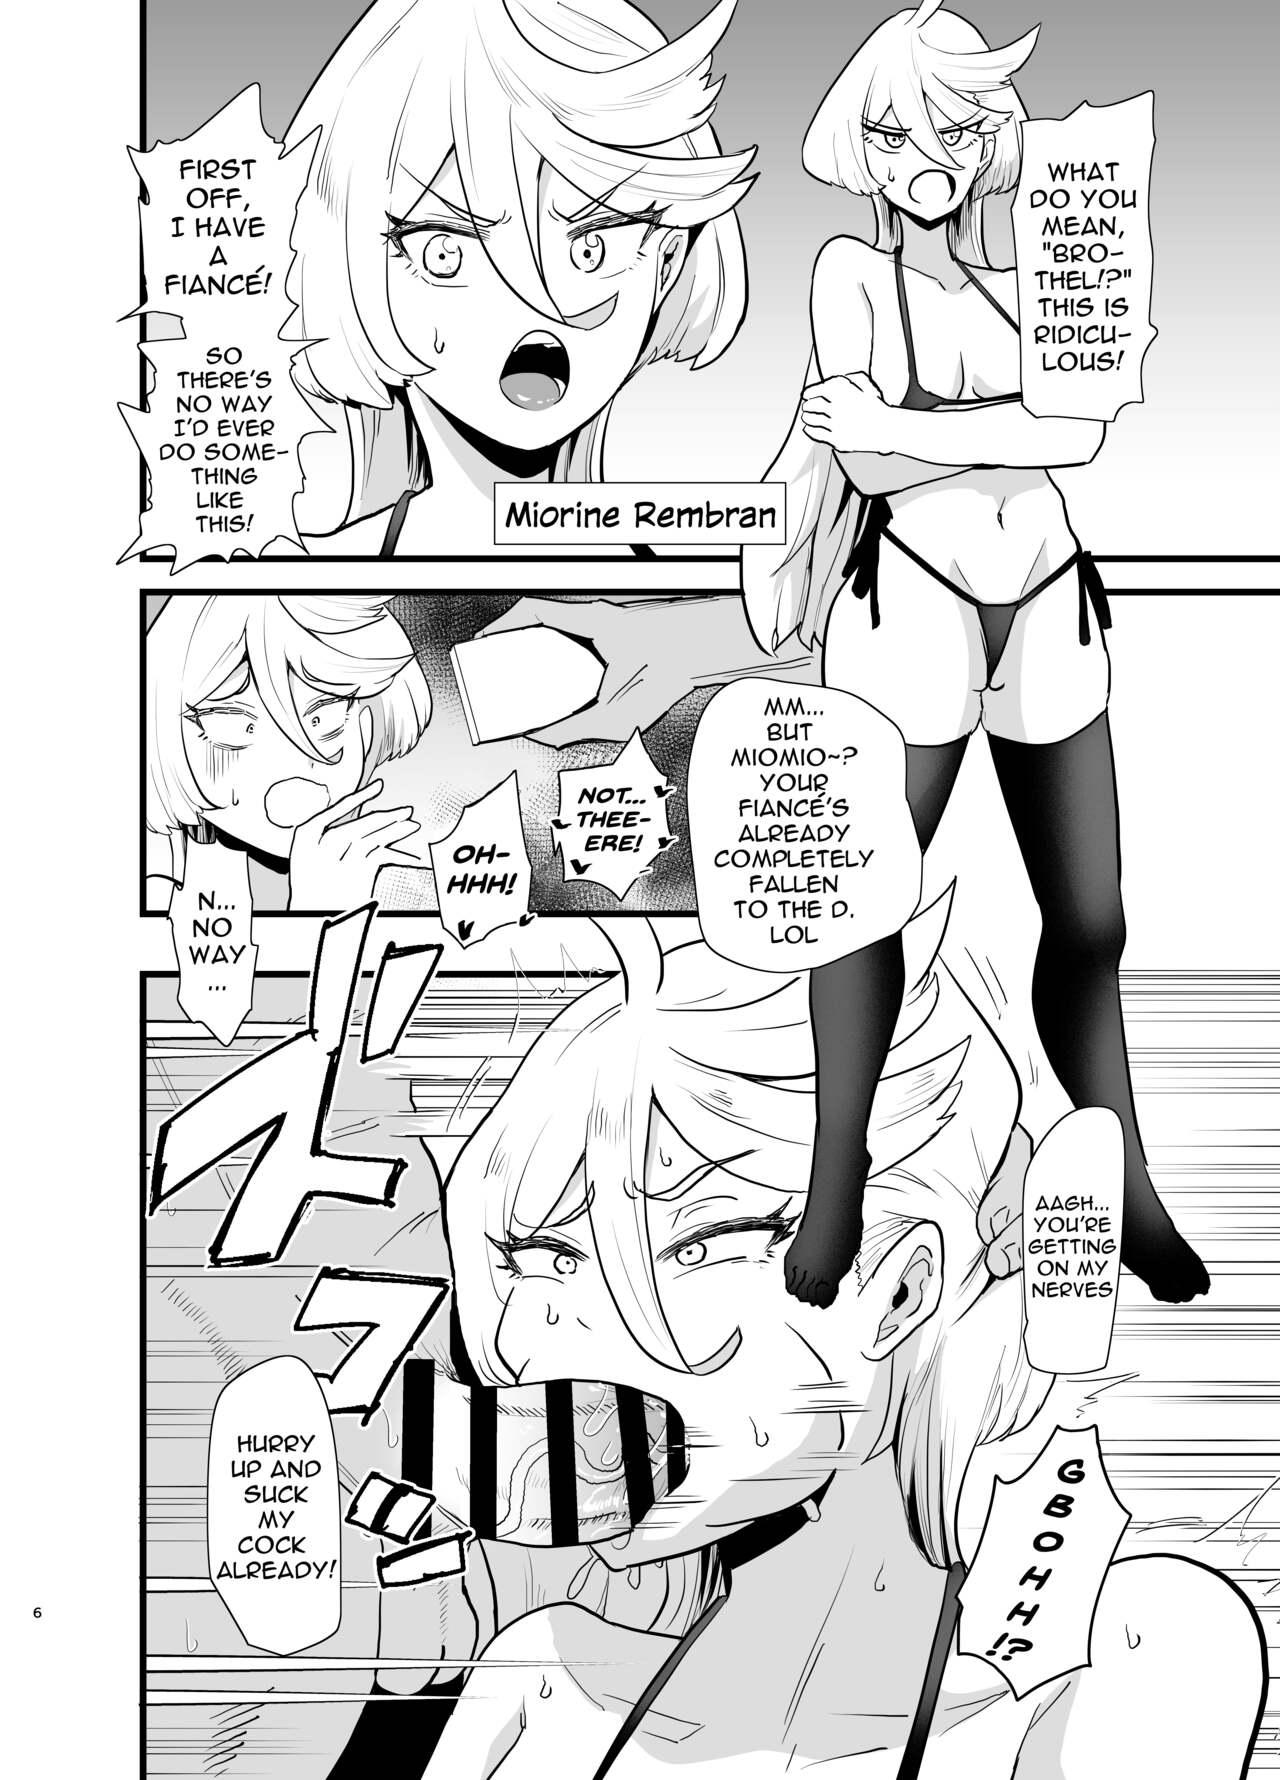 Story Gundam Fuuzoku Musou Suisei no Majo Hen | The Unparalleled Gundam Sex Industry - Witch of Mercury Edition - Mobile suit gundam the witch from mercury Rebolando - Page 7